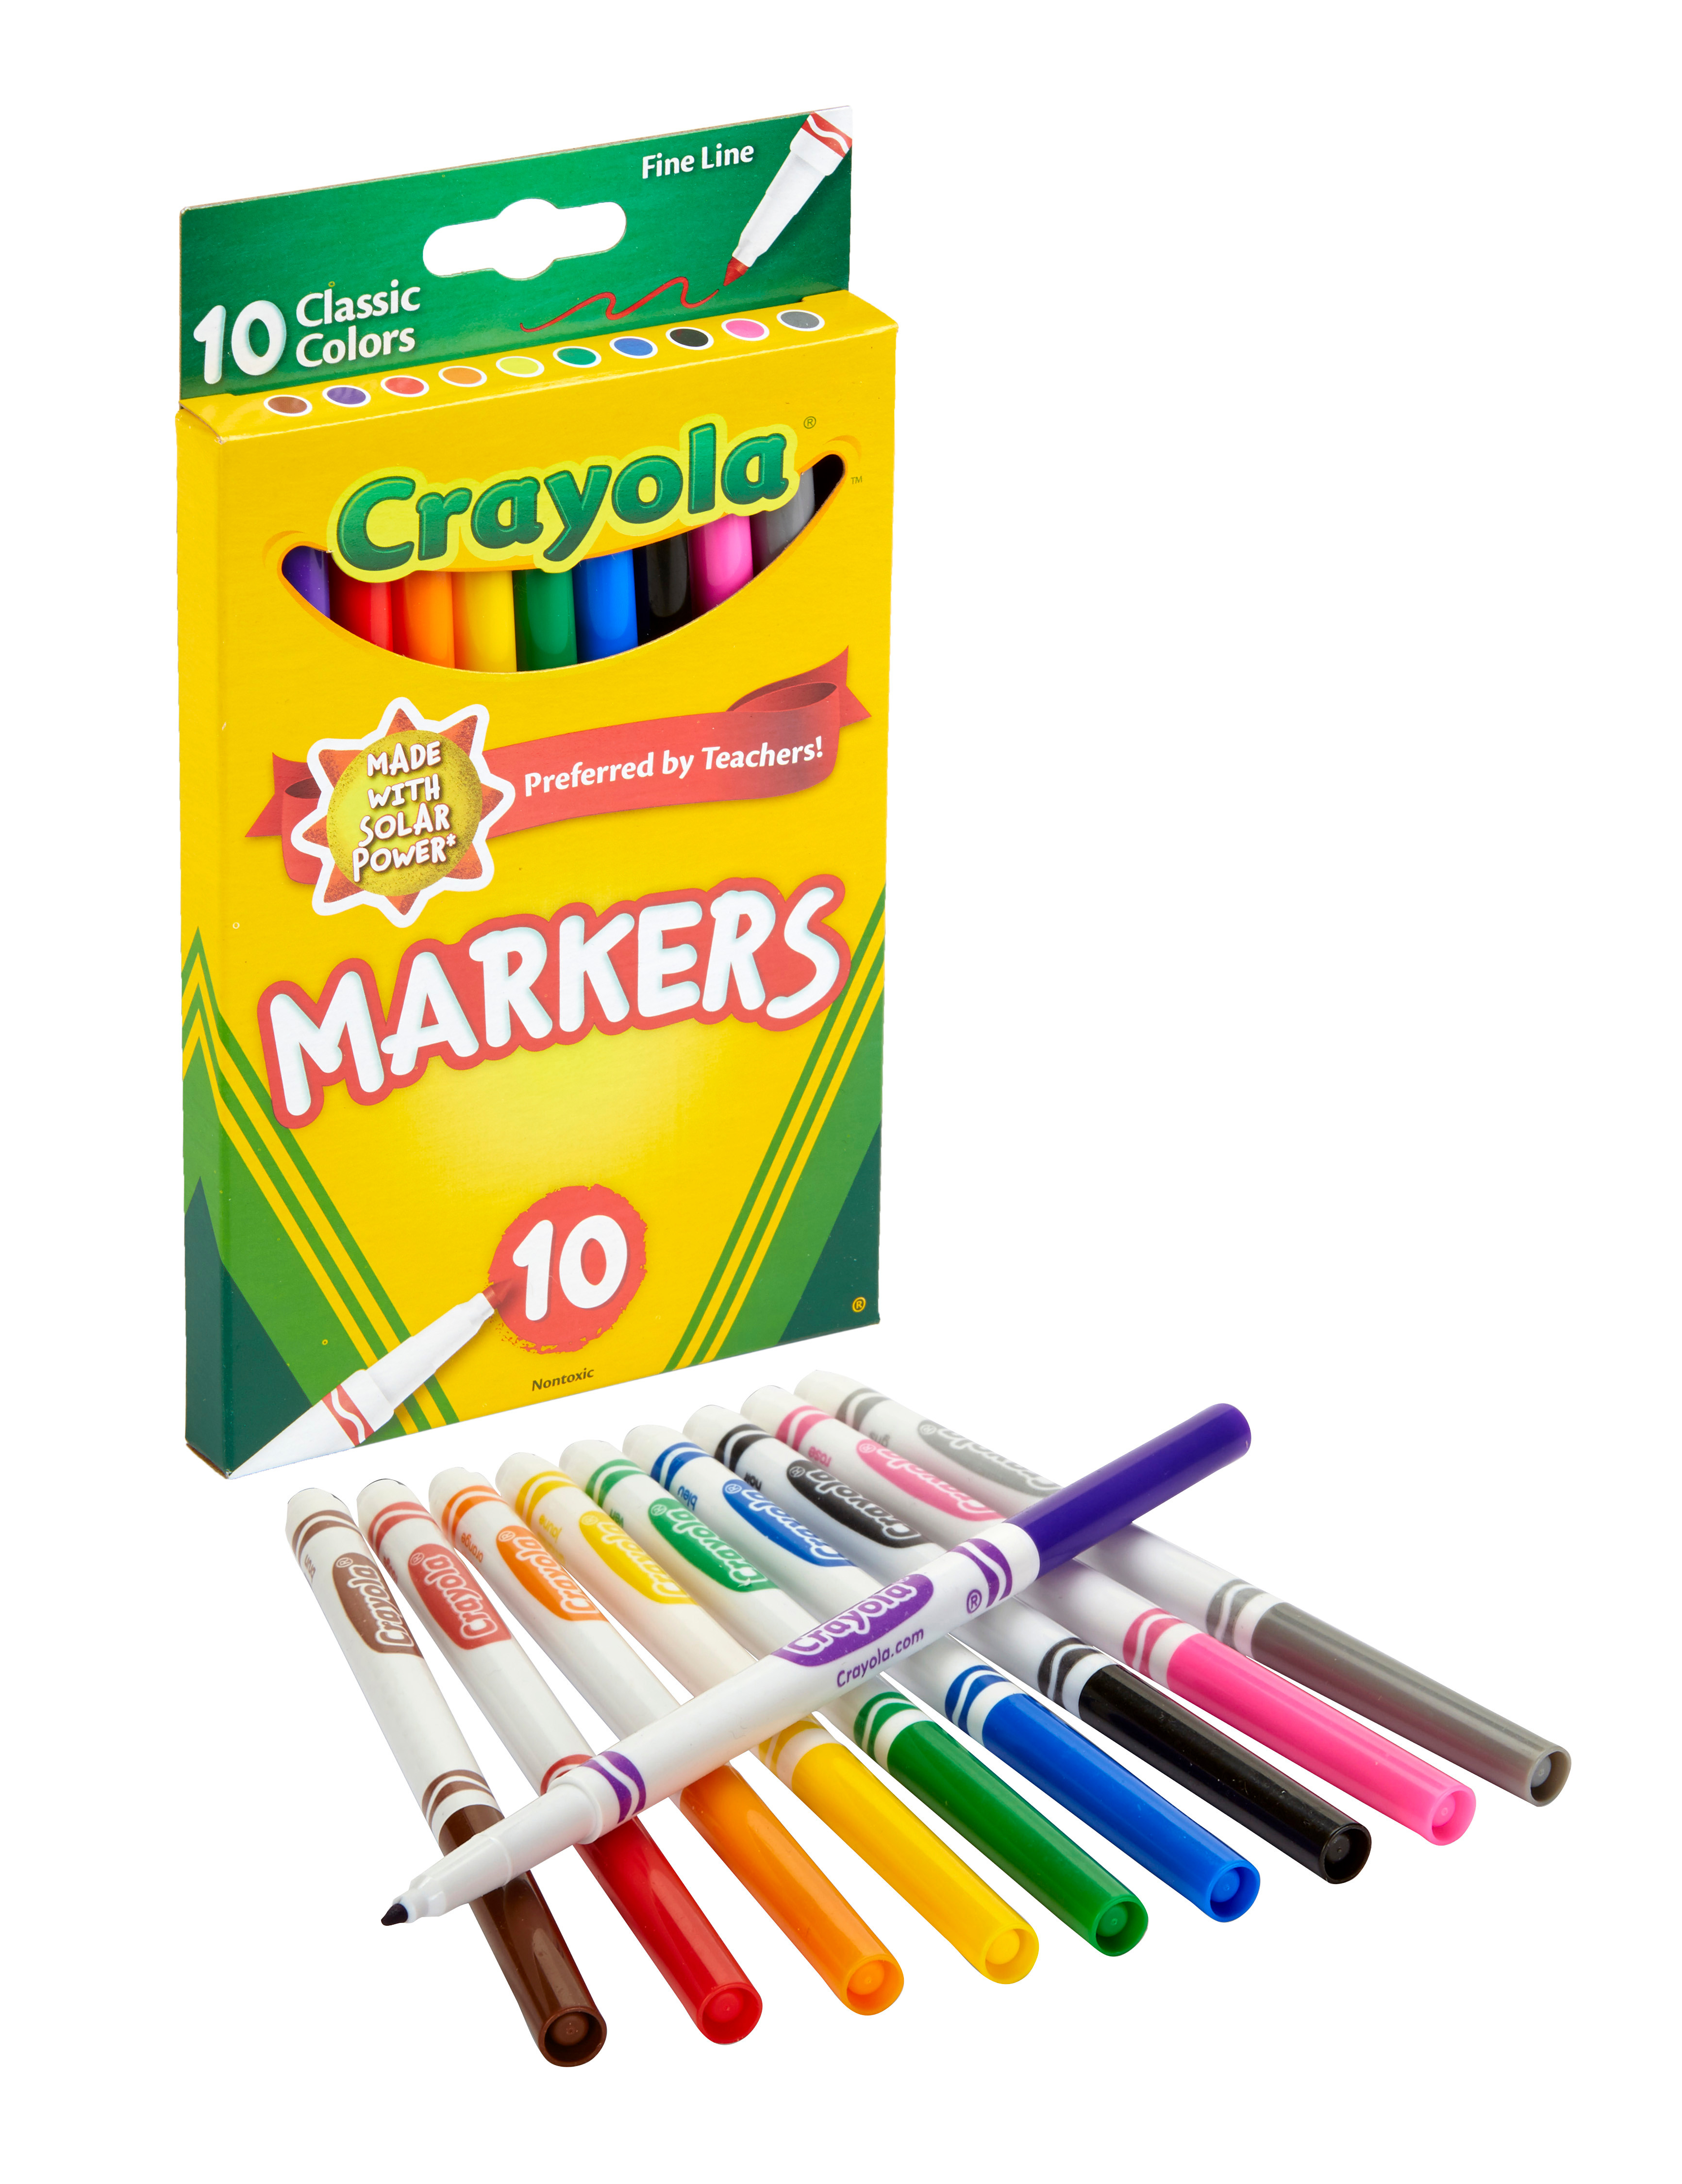 Crayola Classic Thin Line Marker Set, 10 Ct, Multi Colors, Back to School Supplies for Kids - image 2 of 9